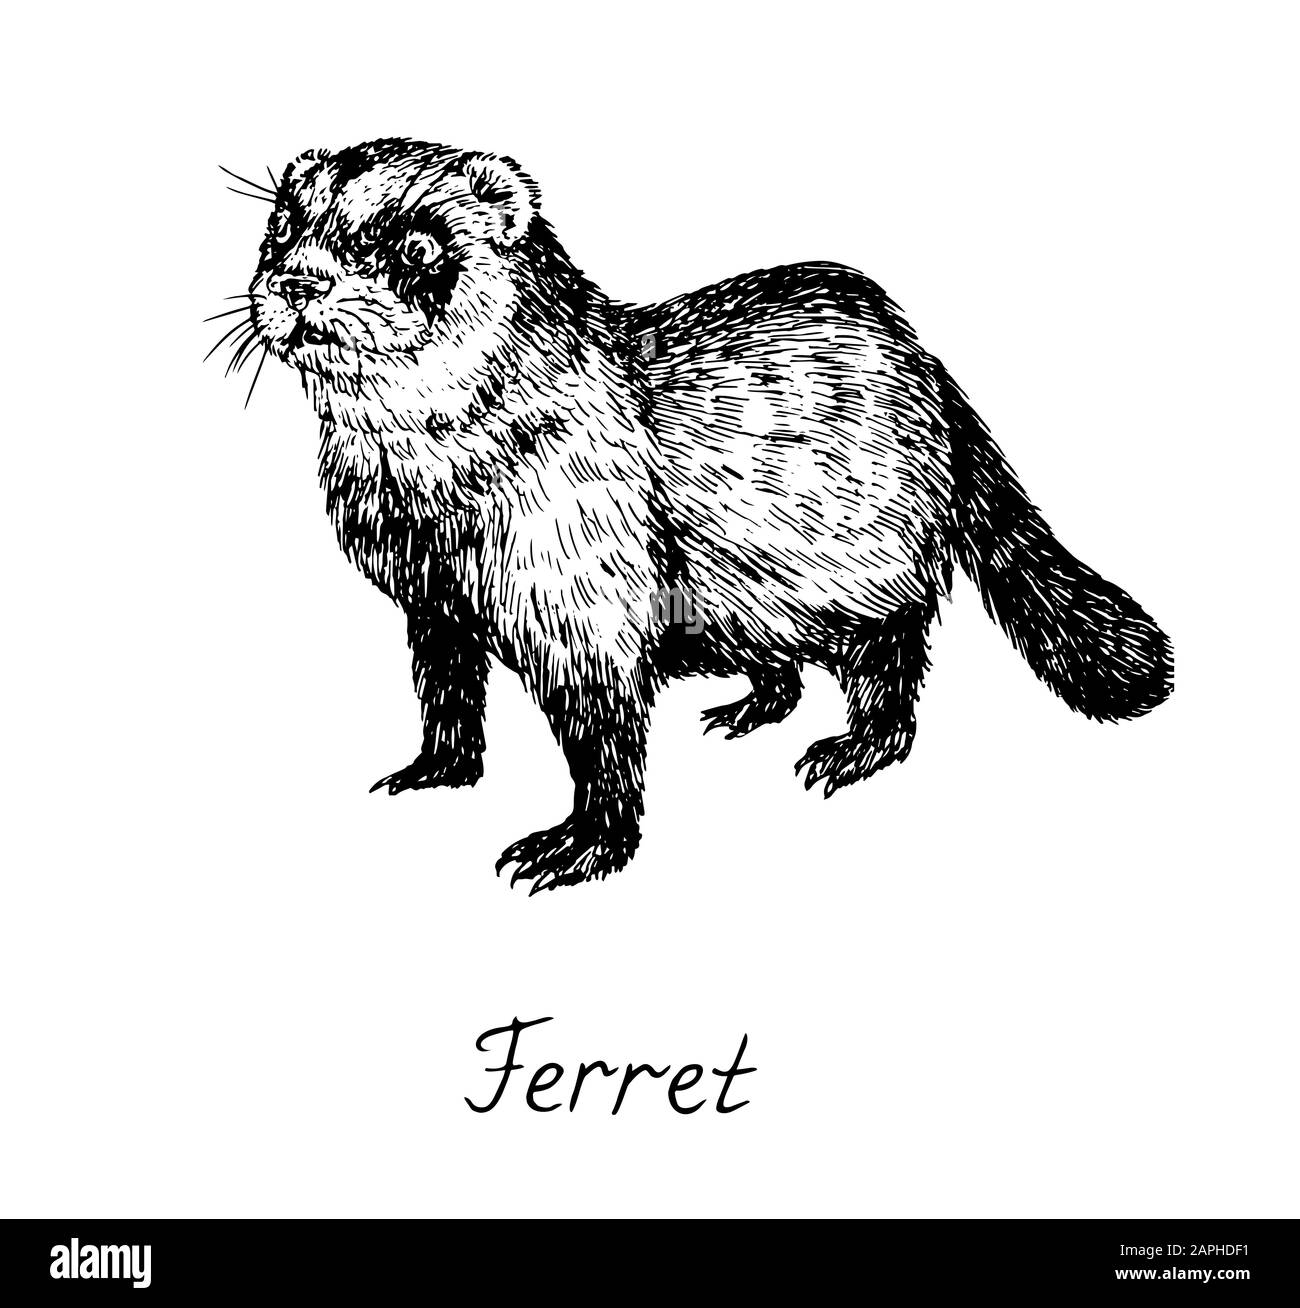 Ferret, hand drawn doodle, drawing sketch in gravure style, illustration Stock Photo